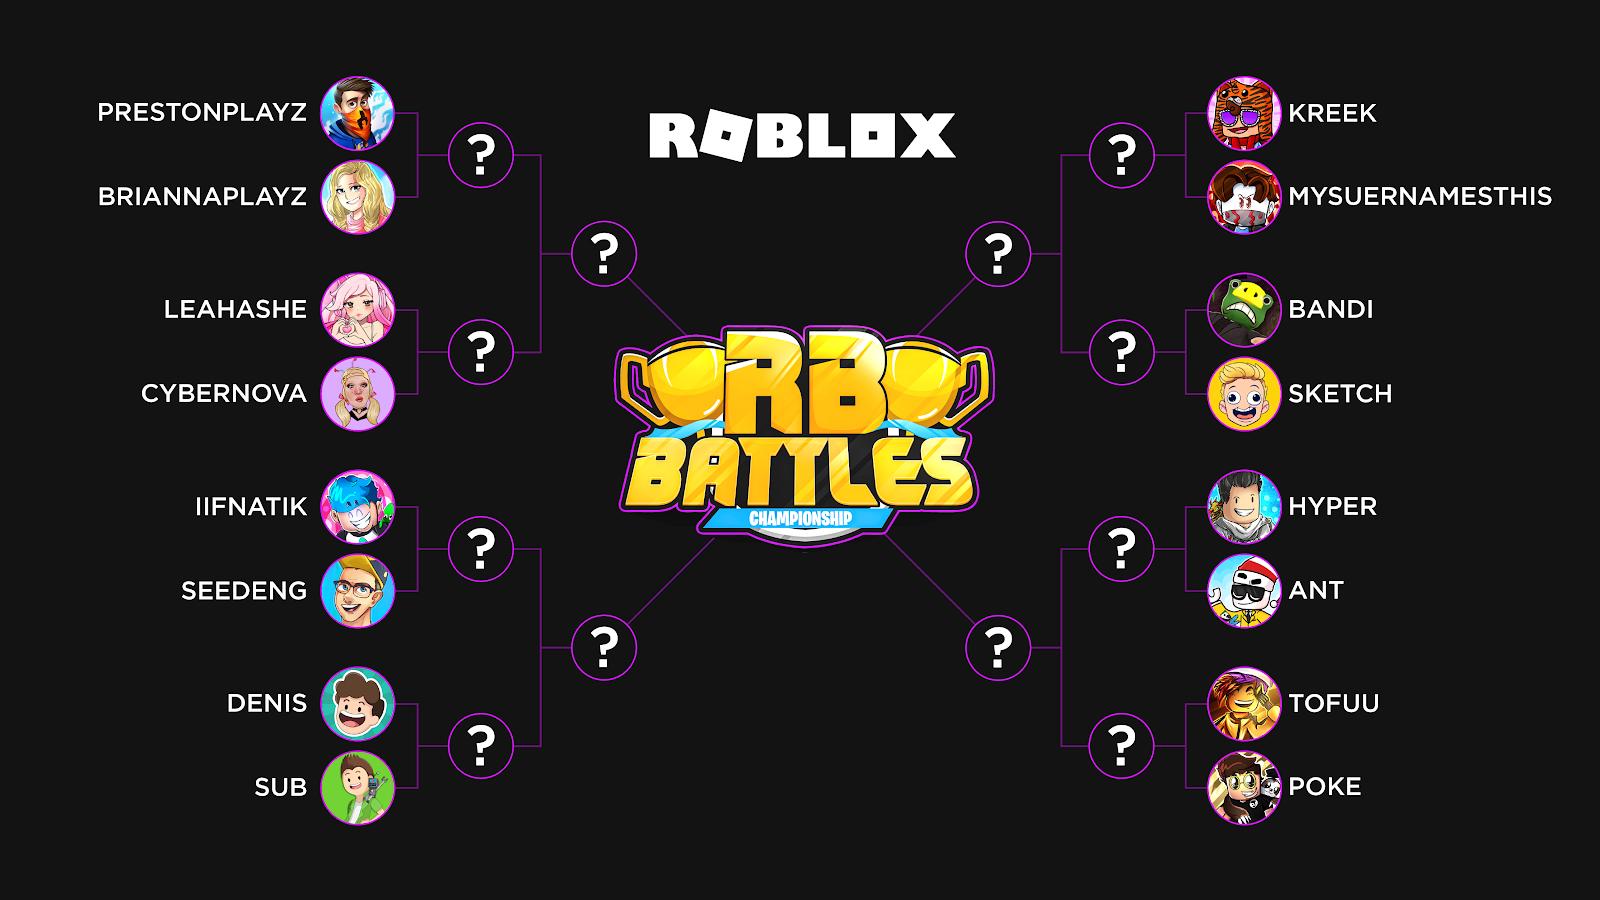 Roblox On Twitter The Robloxbattles Championship Begins In 2